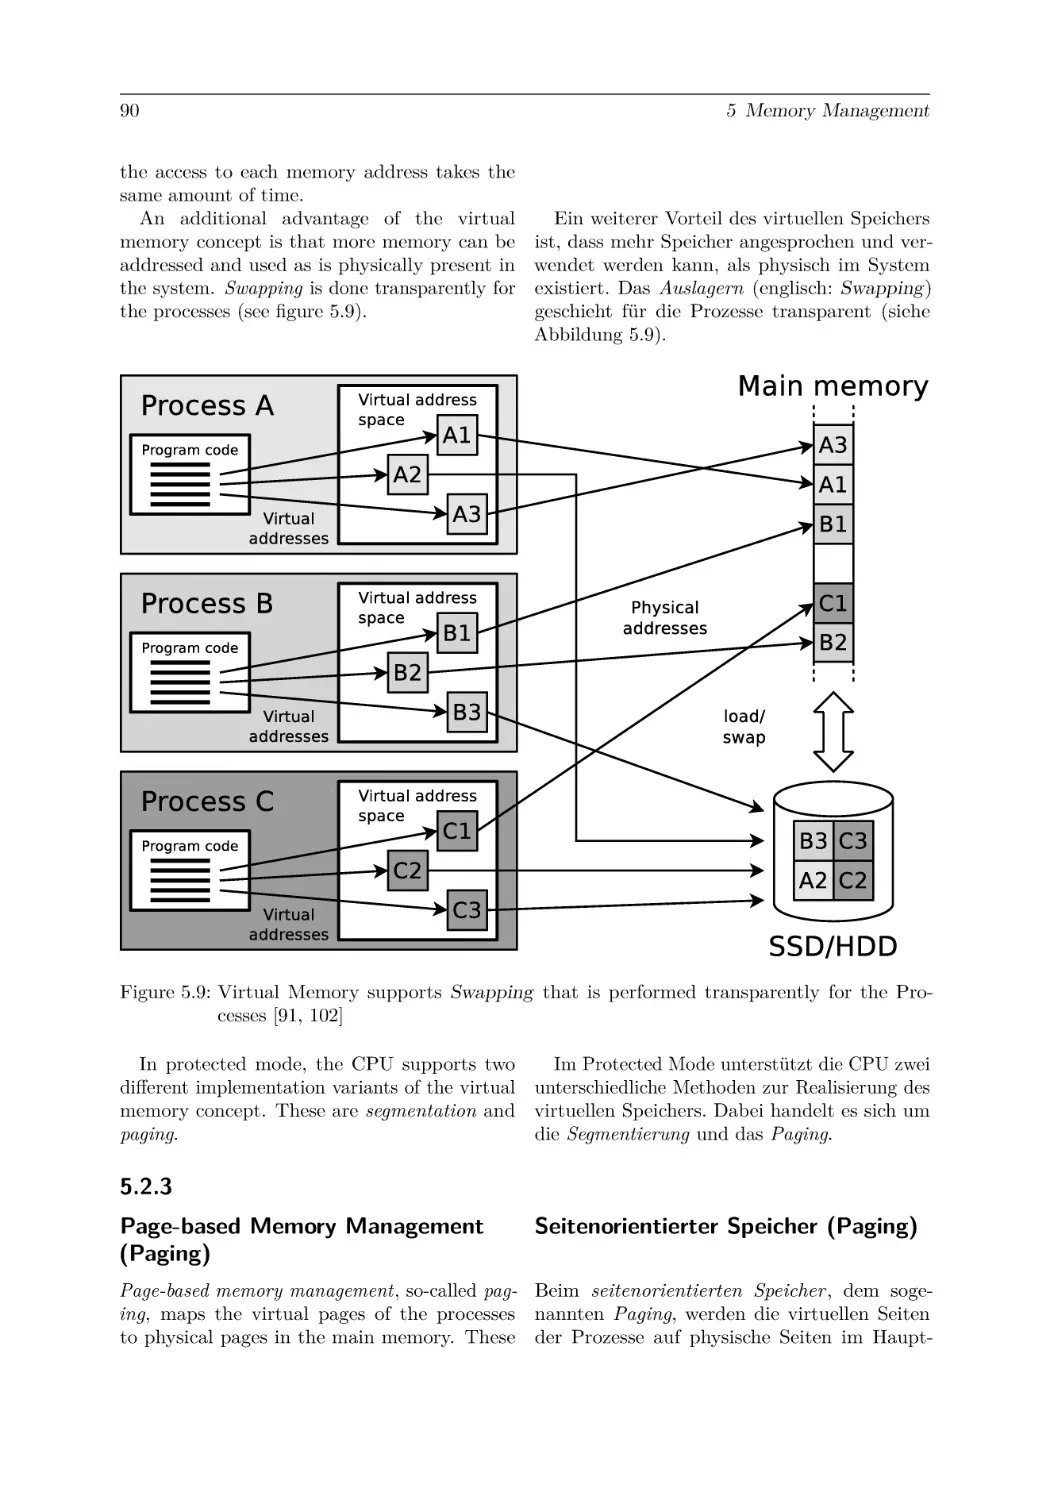 5.2.3
Page-based Memory Management (Paging)